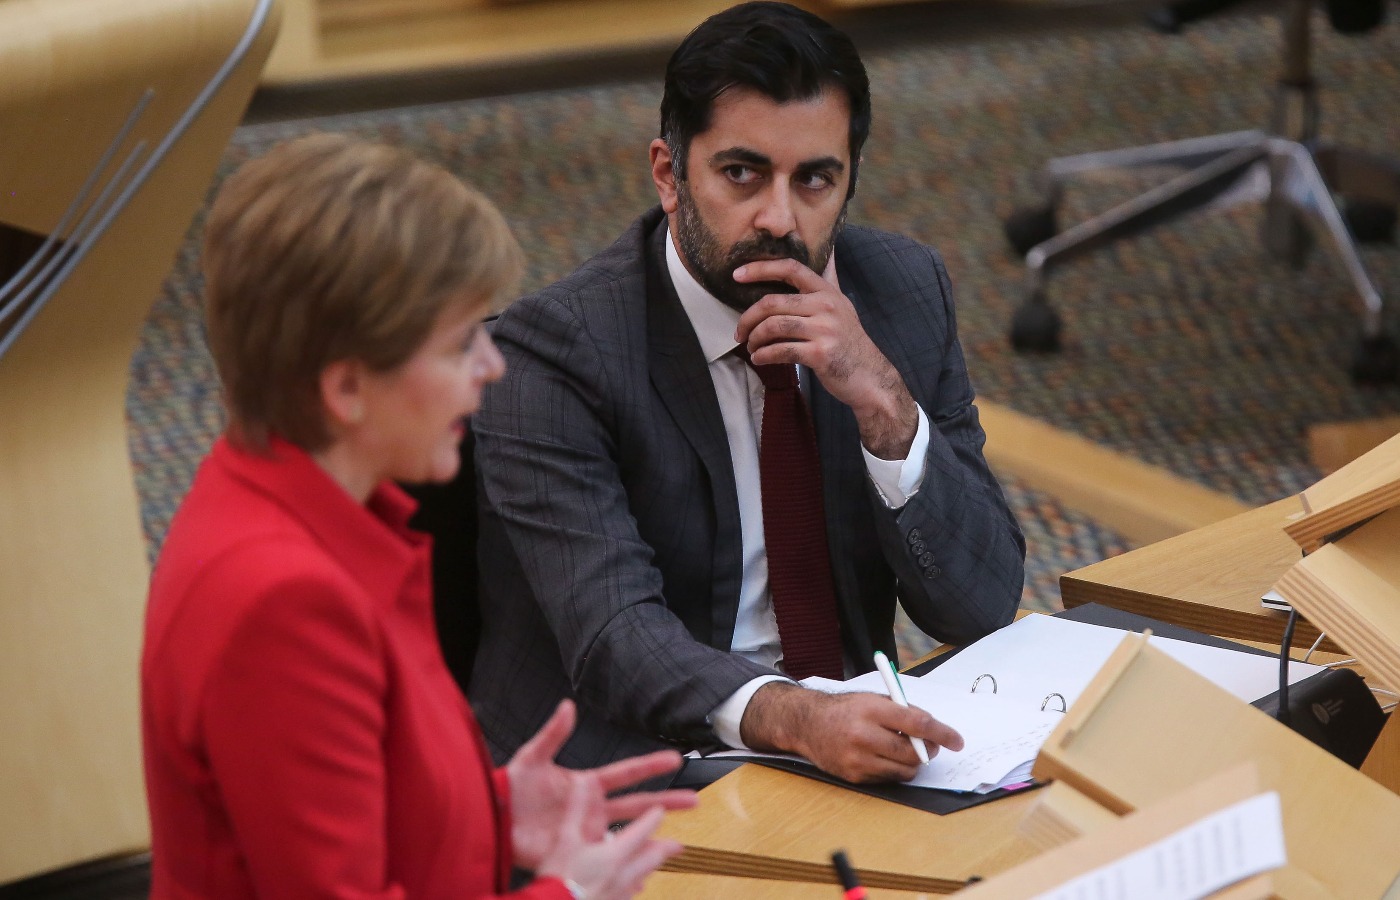 A report said messages sent by former first minister Nicola Sturgeon about the pandemic were manually deleted from her phone.